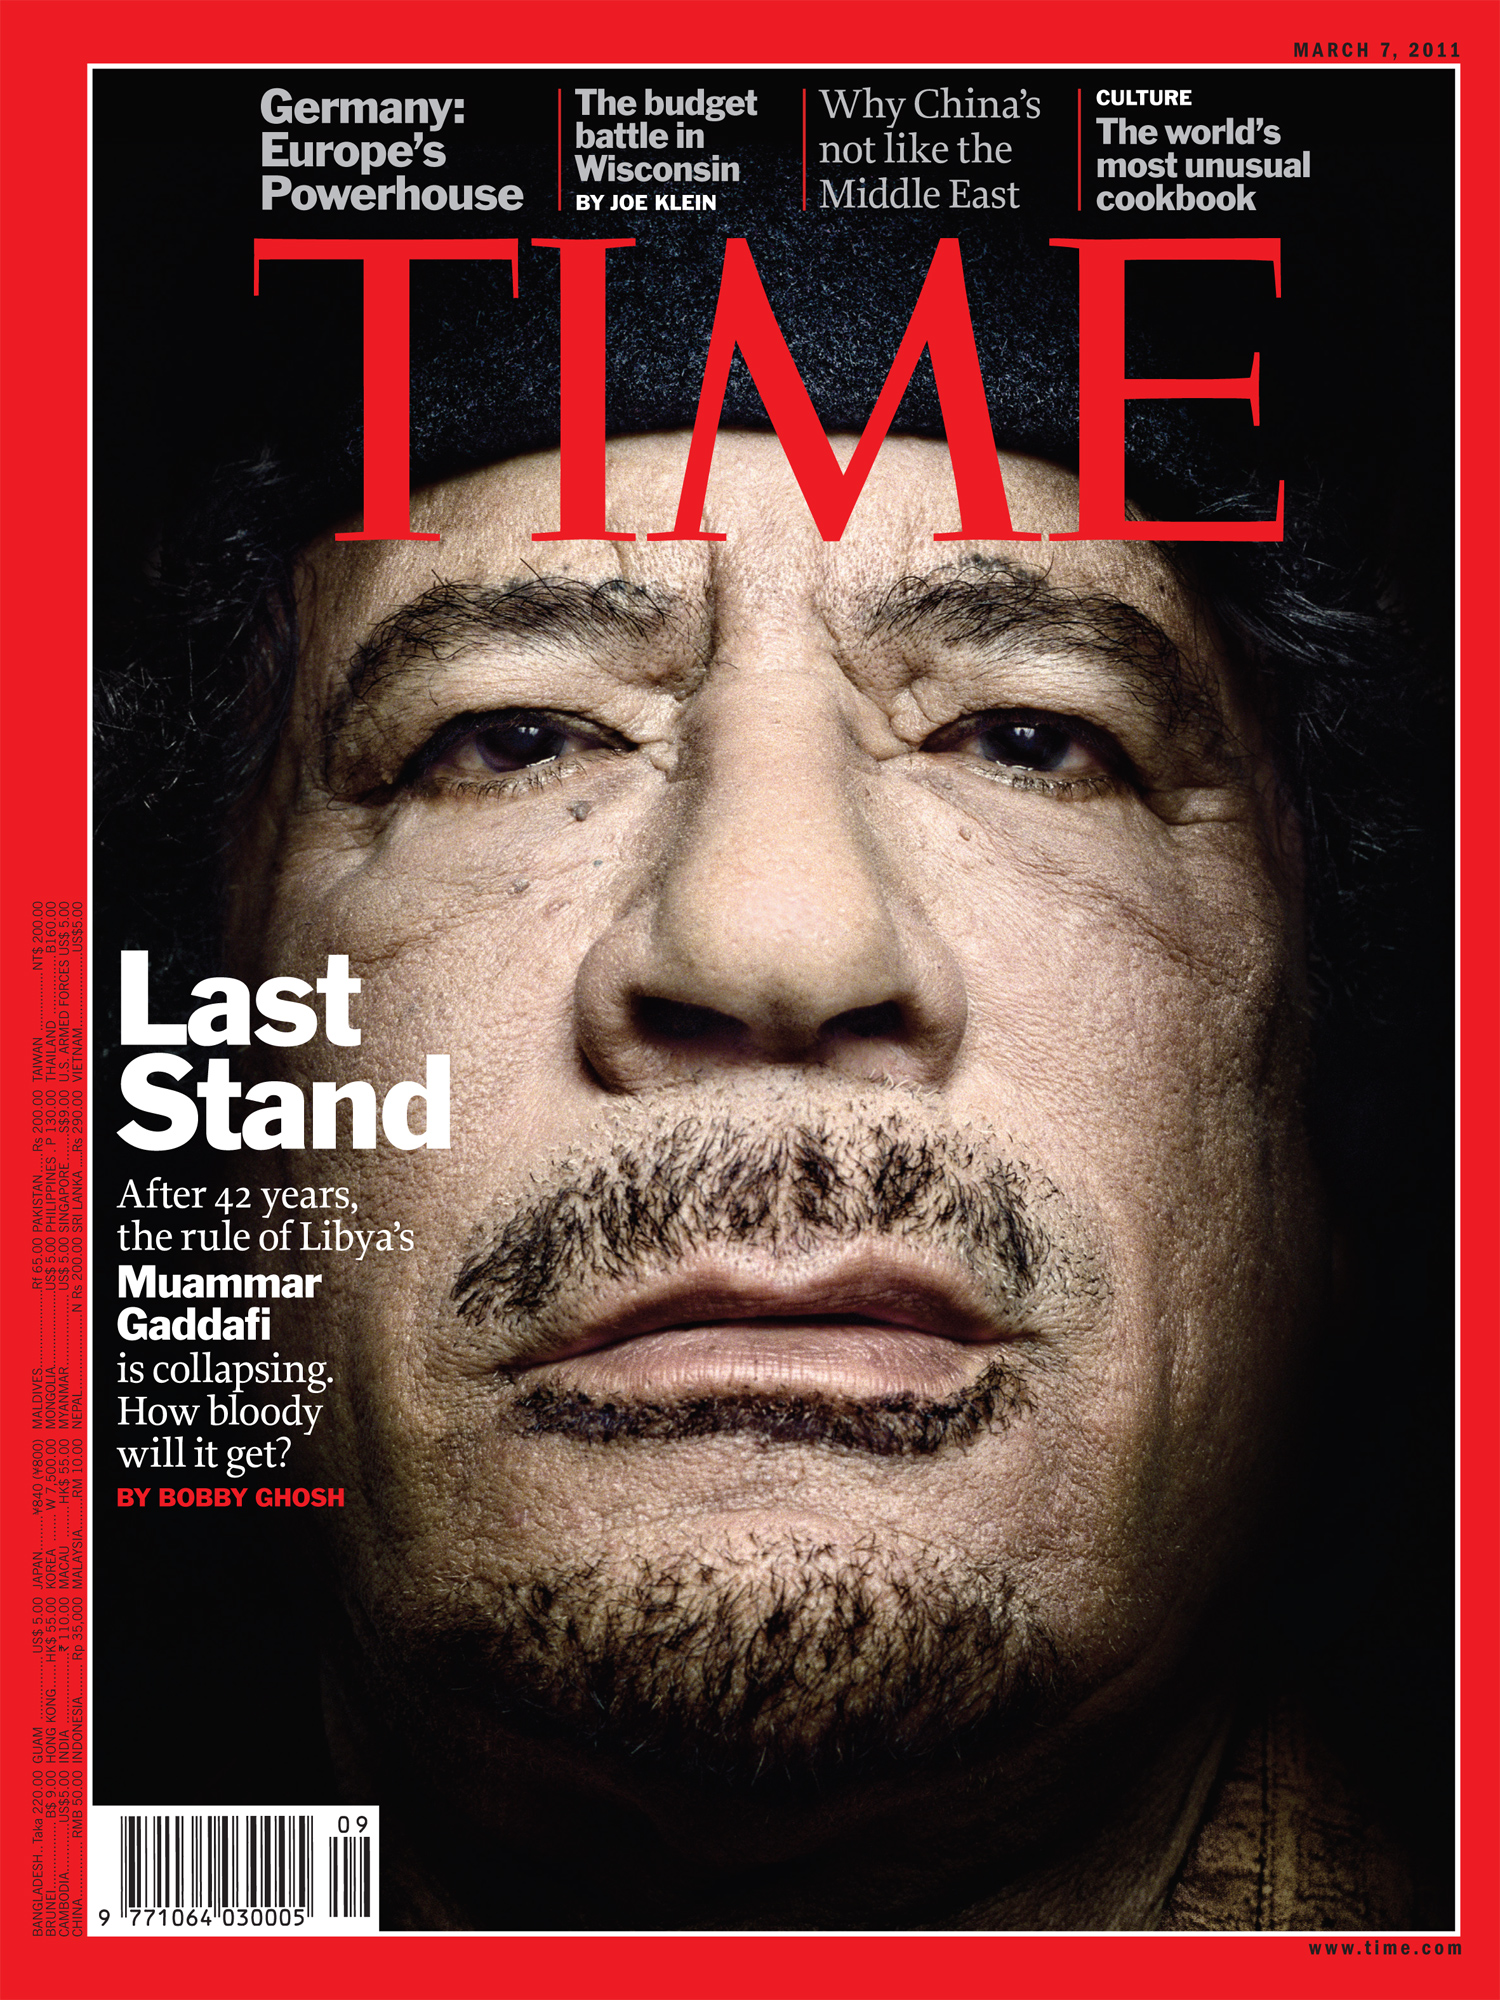 The cover of TIME International, March 7, 2011.